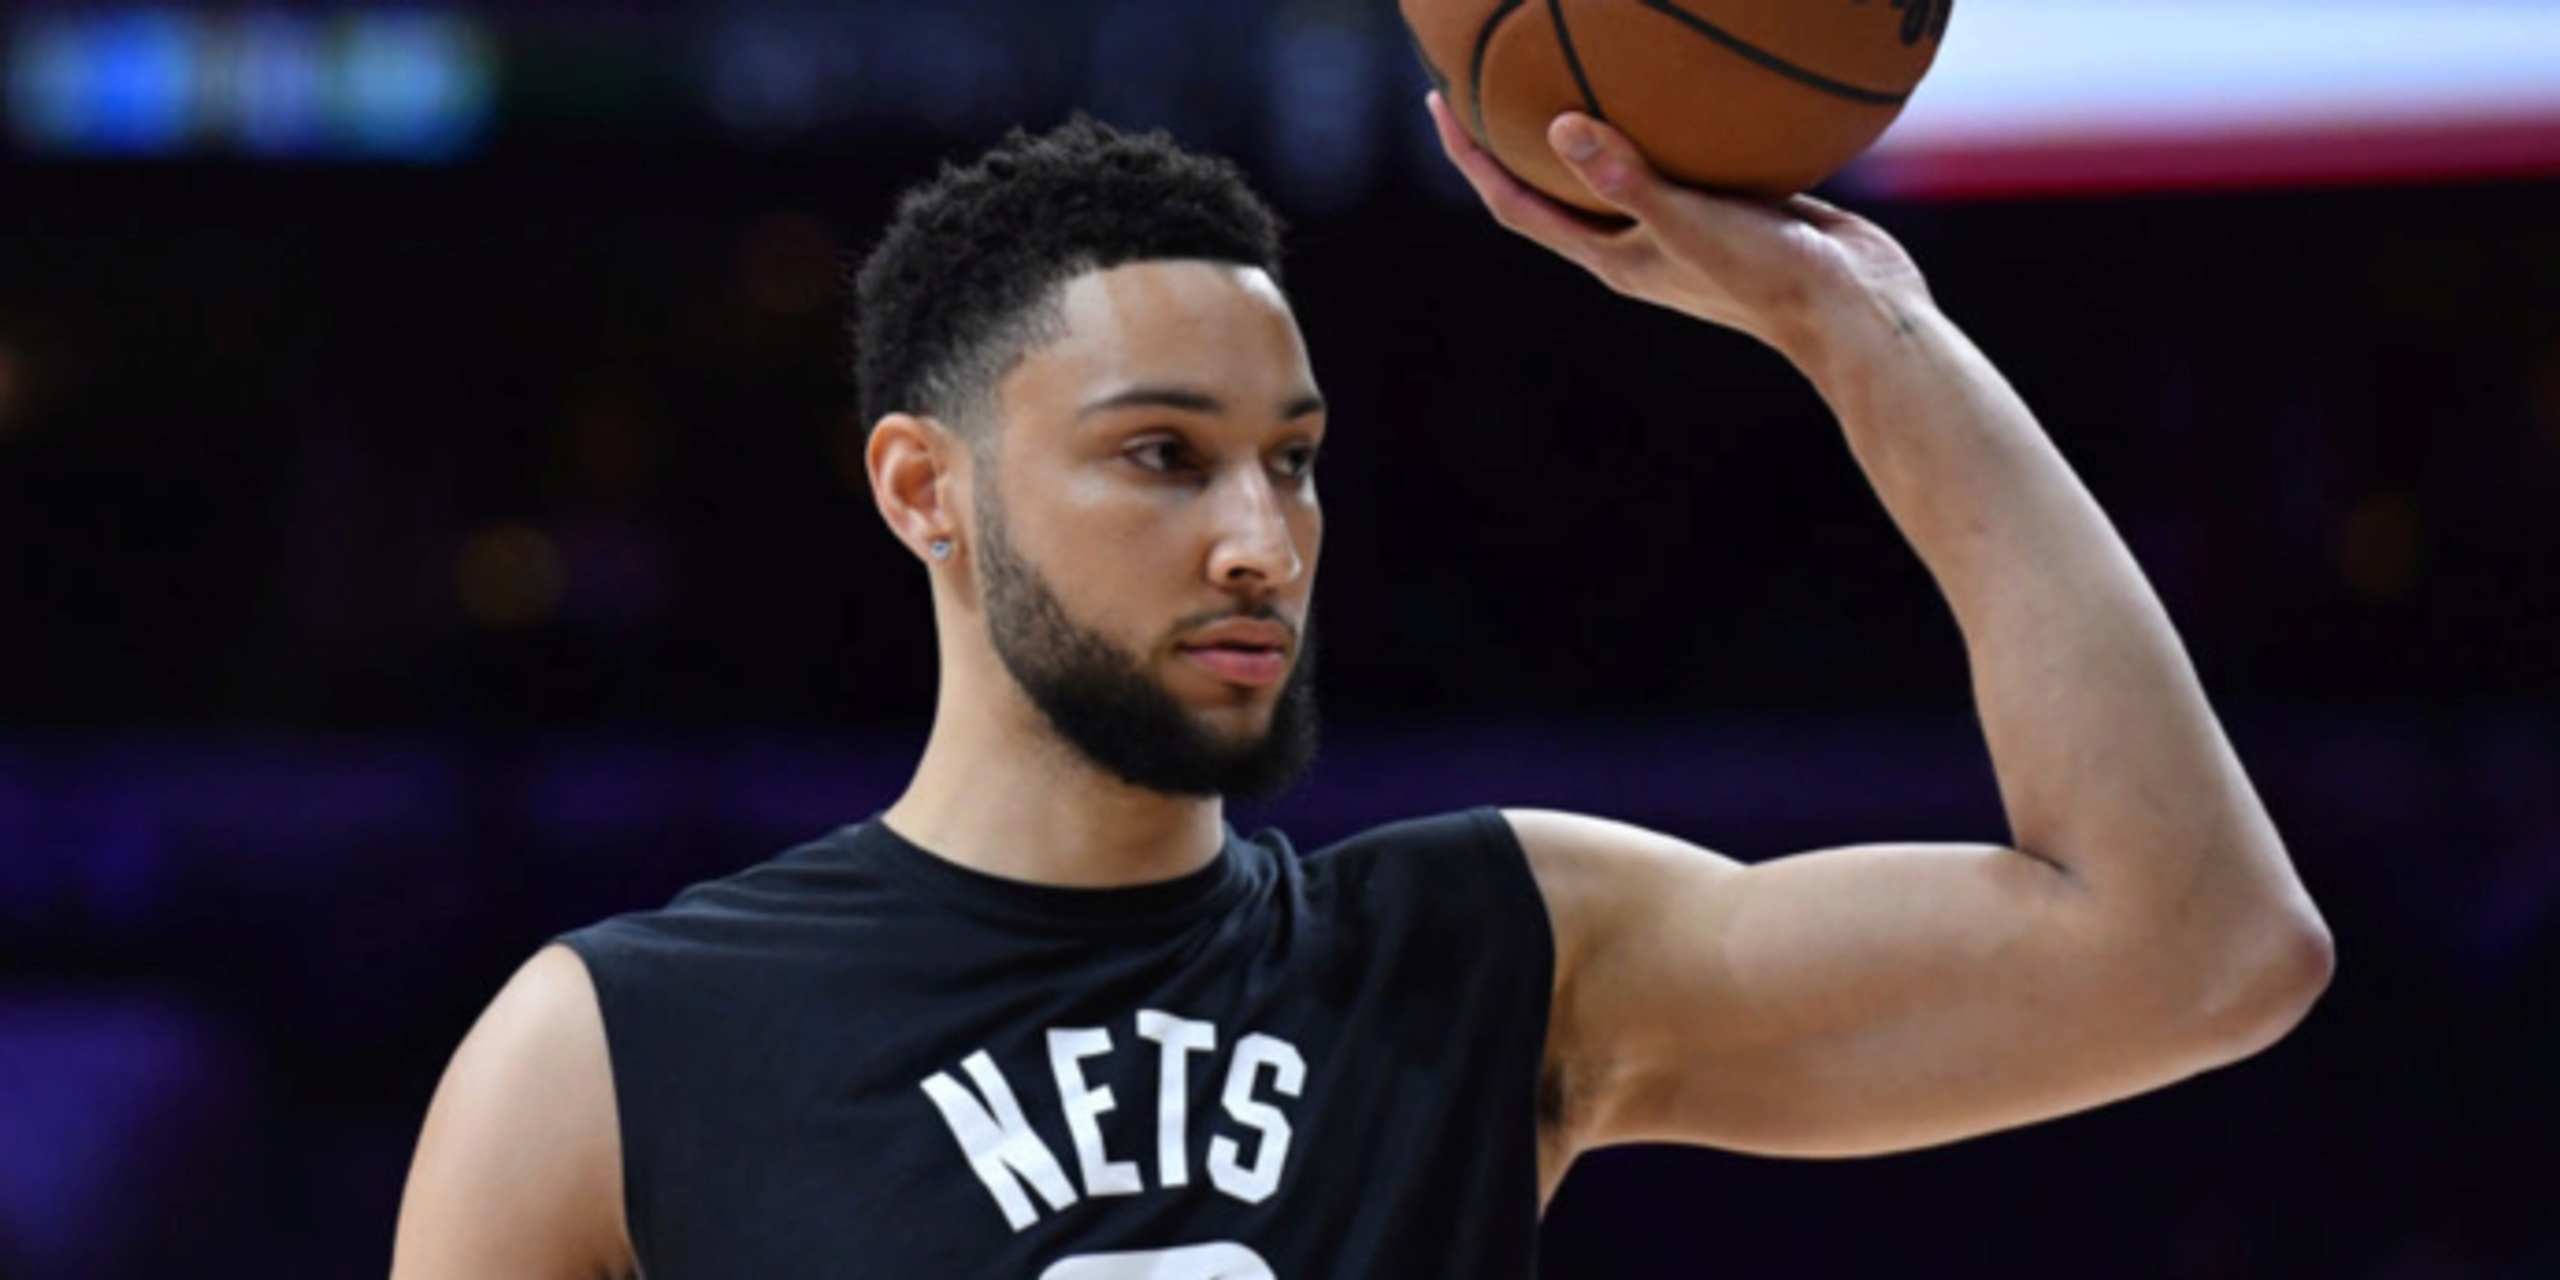 At some point, Nets may be wise to rule Ben Simmons out for season